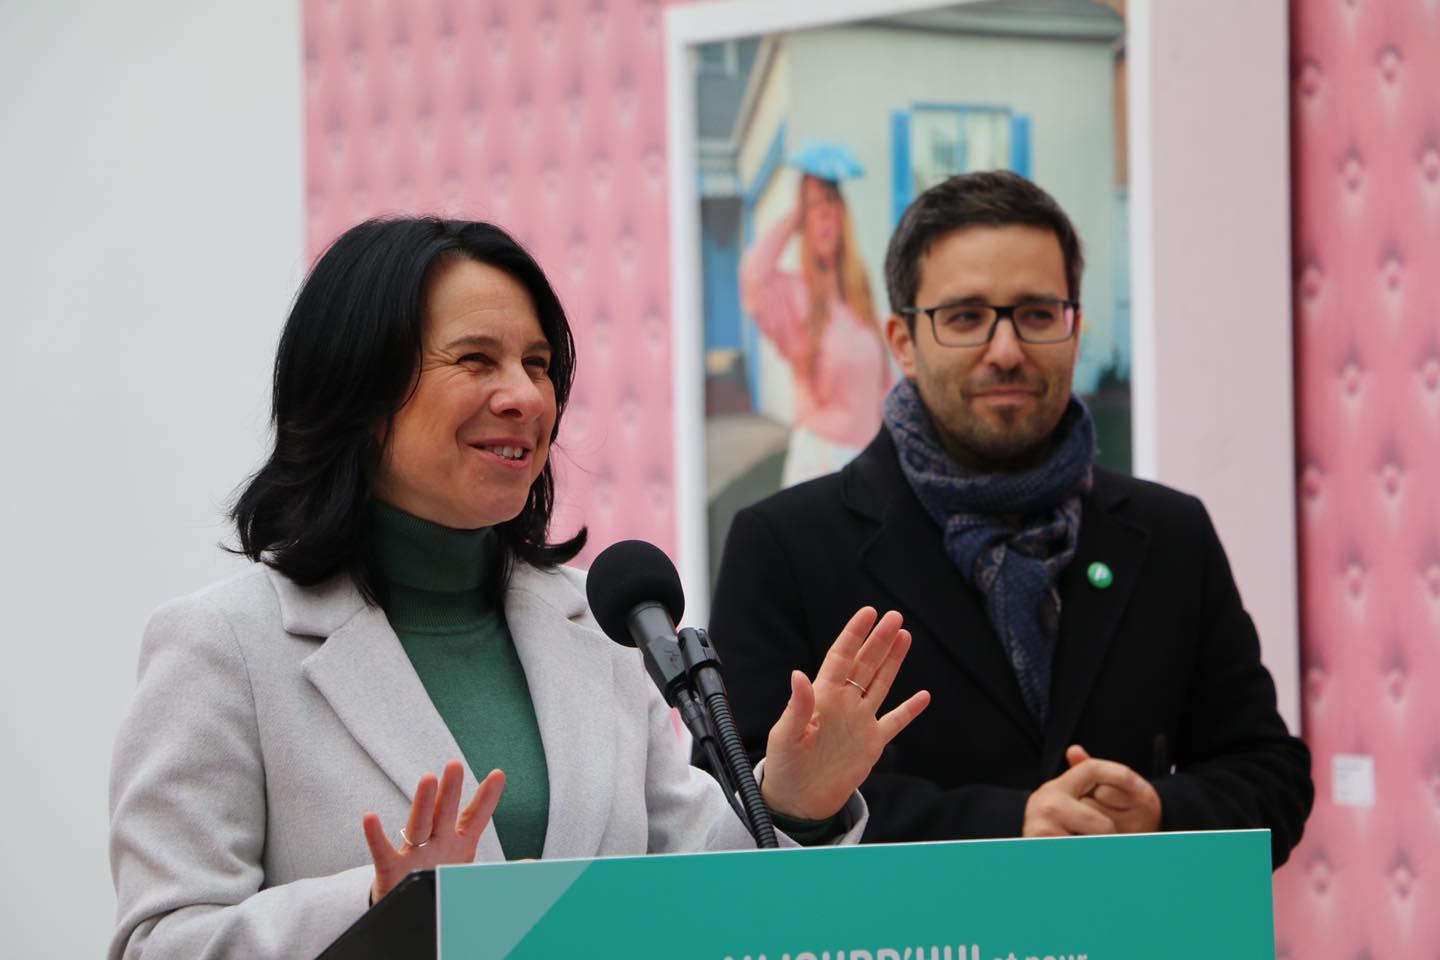 Projet Montréal will enhance the Village and beautify Sainte-Catherine Street East